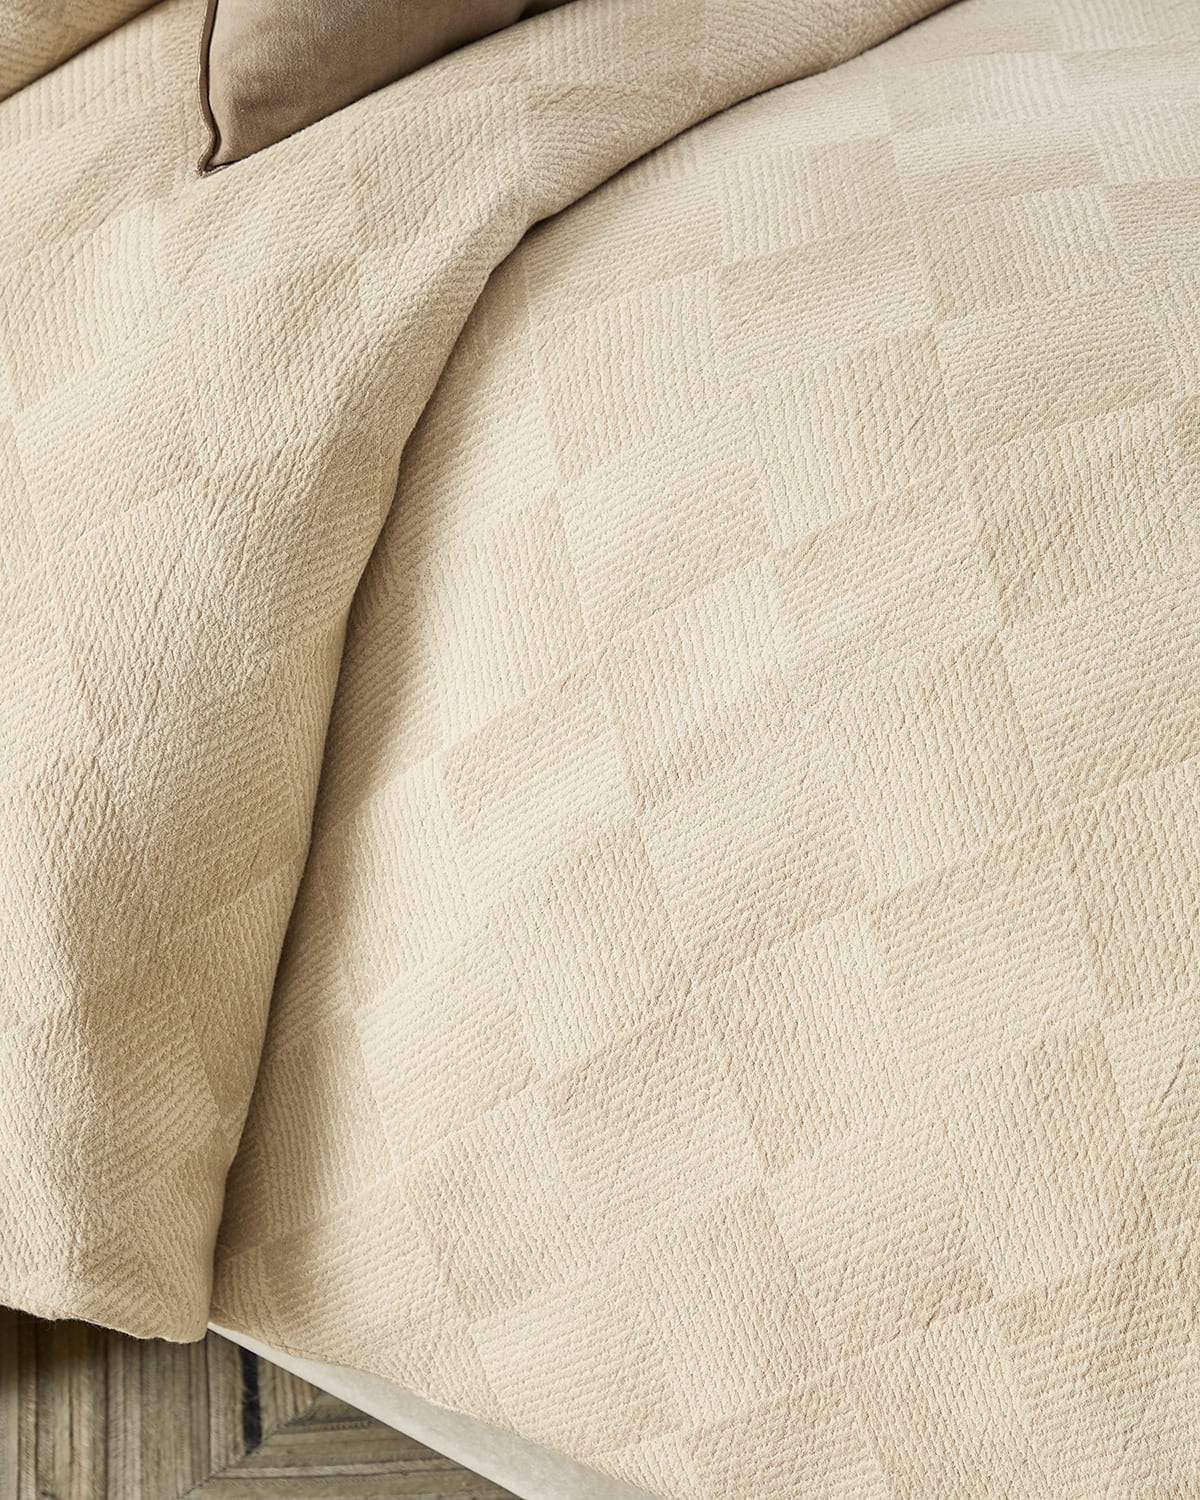 Amity Home Miko King Duvet Cover In Neutral